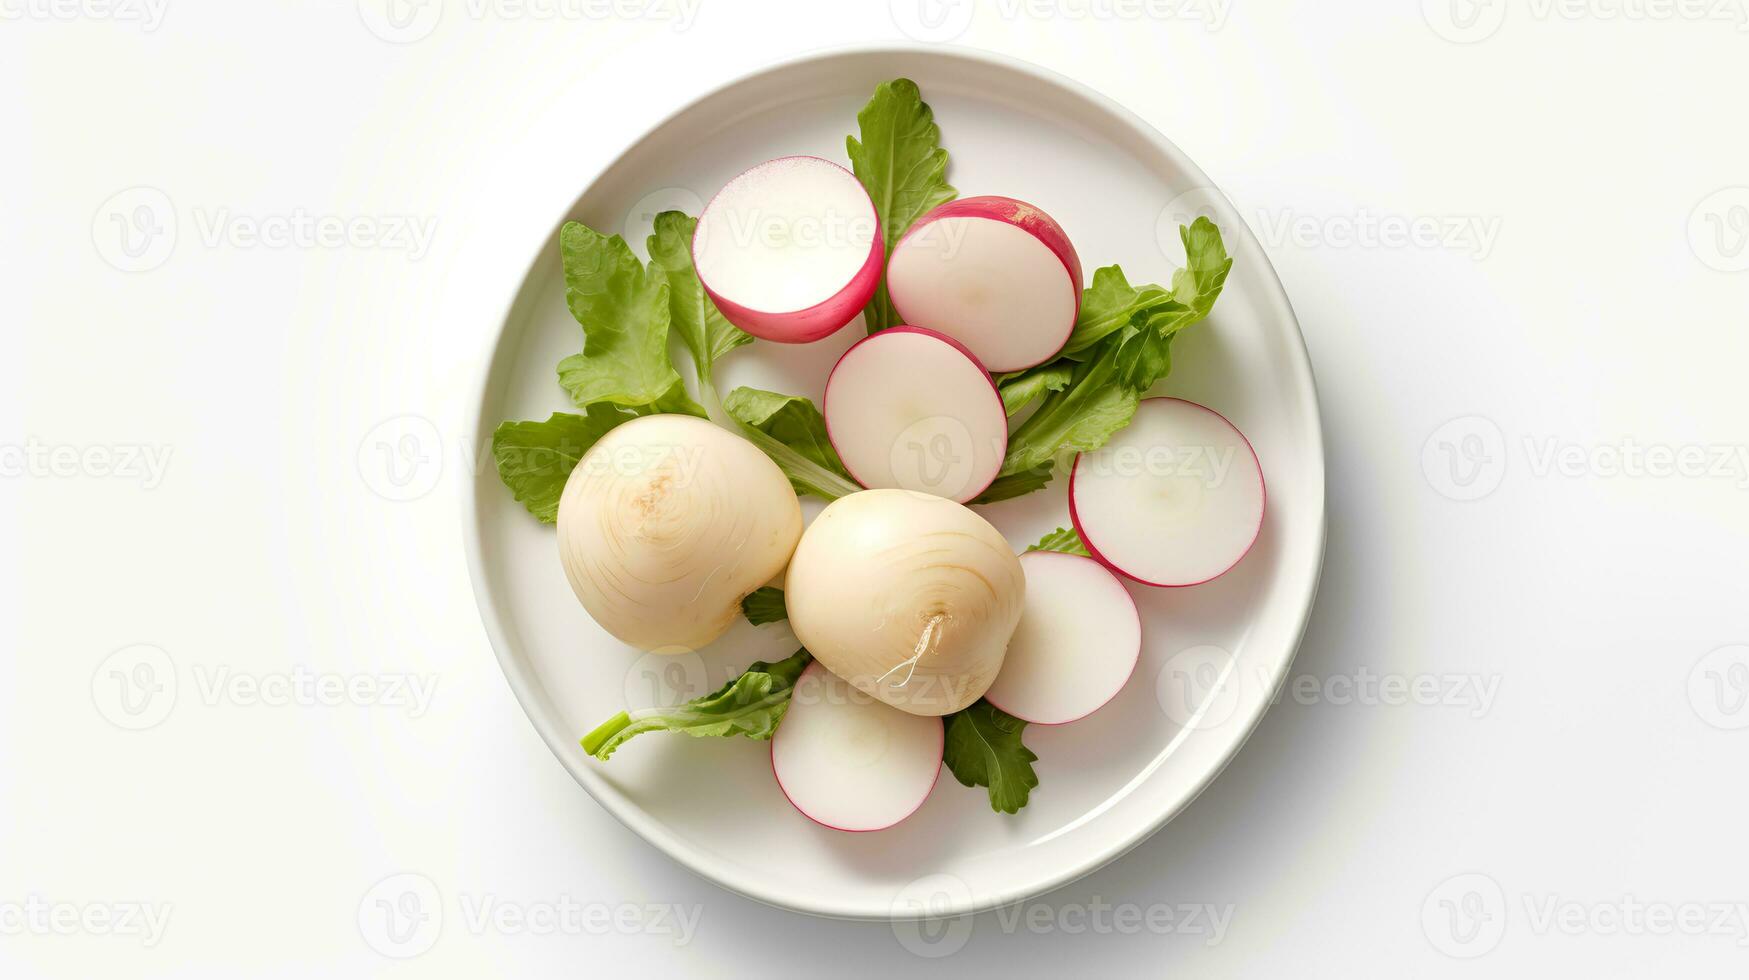 Photo of Turnips sliced pieces on minimalist plate isolated on white background